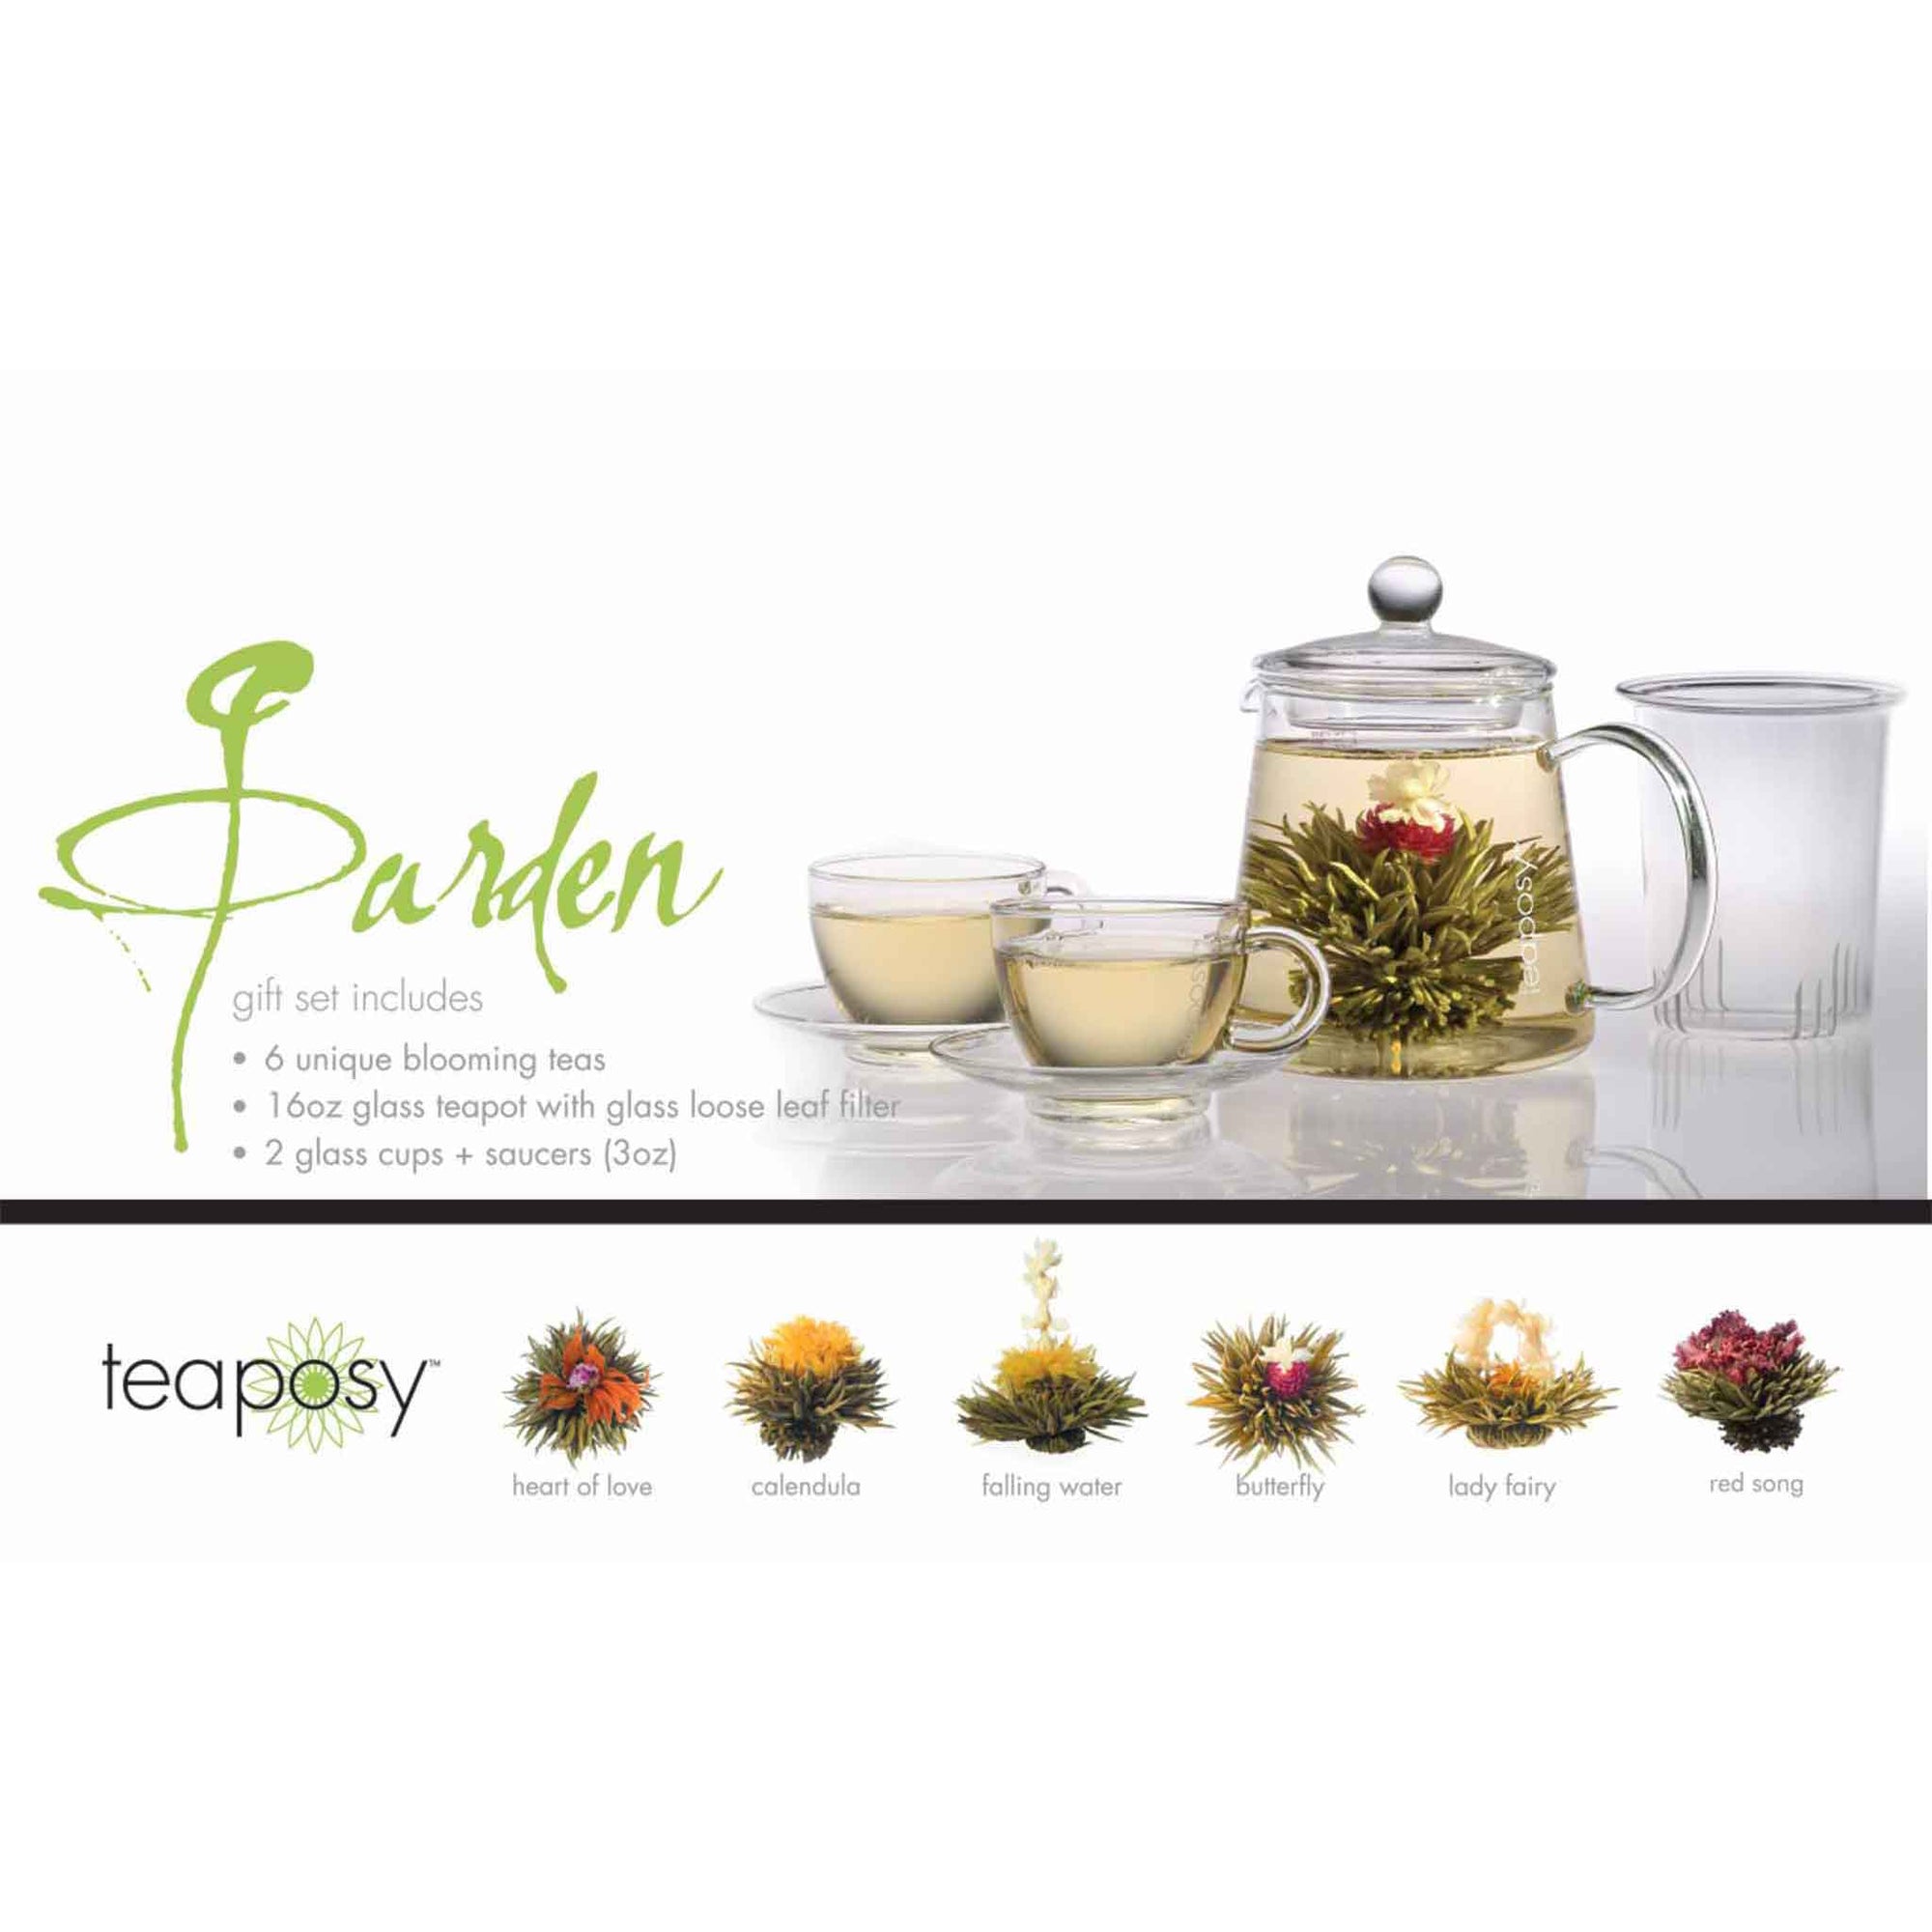 Teaposy garden posy gift set with 6 unique blooming teas, a tea-for-two glass teapot and 2 soulmates glass tea cup sets